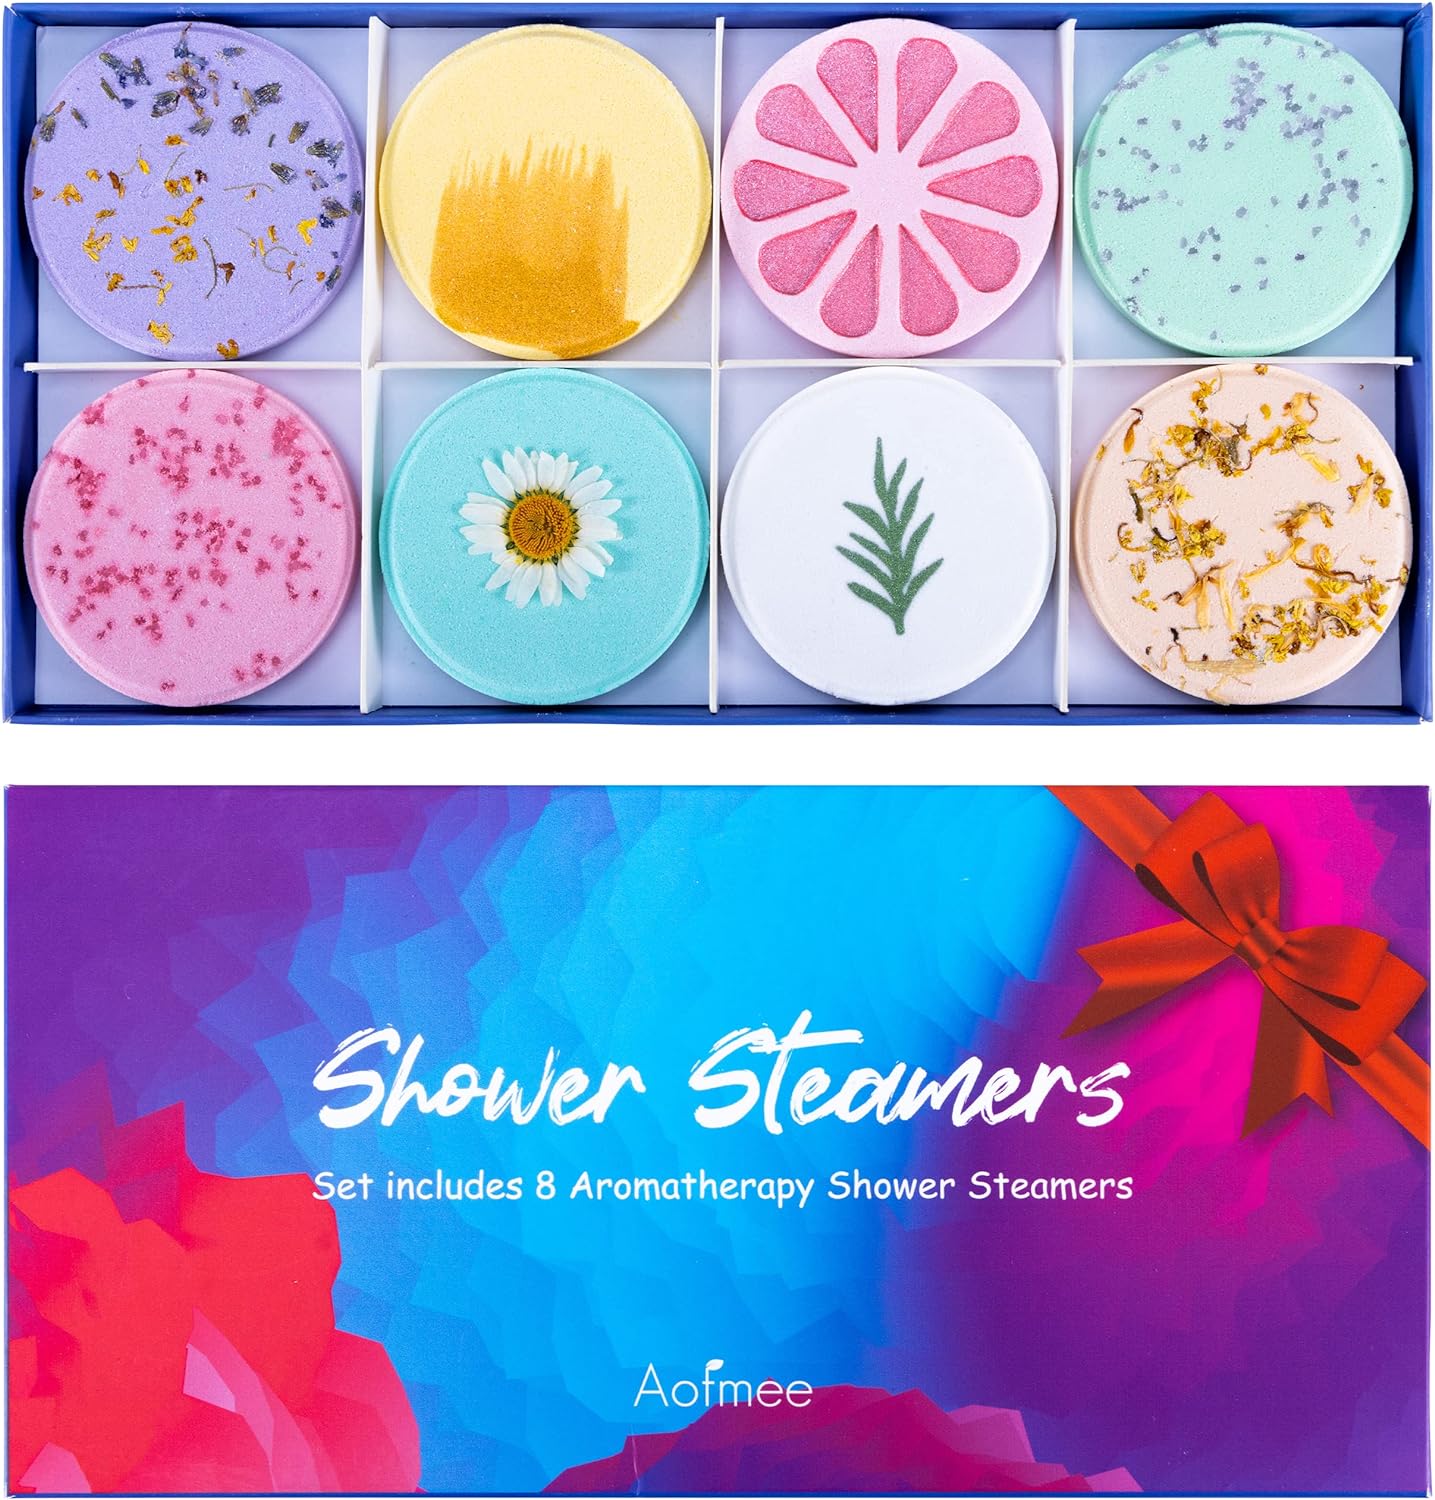 Aofmee Shower Steamers Aromatherapy - Pack of 8 Shower Bombs Gift Set for Women and Men, Shower Tablets with Essential Oils for Relaxation, Pamper Self Care Birthday Gifts for Her/Him, Mum or Wife